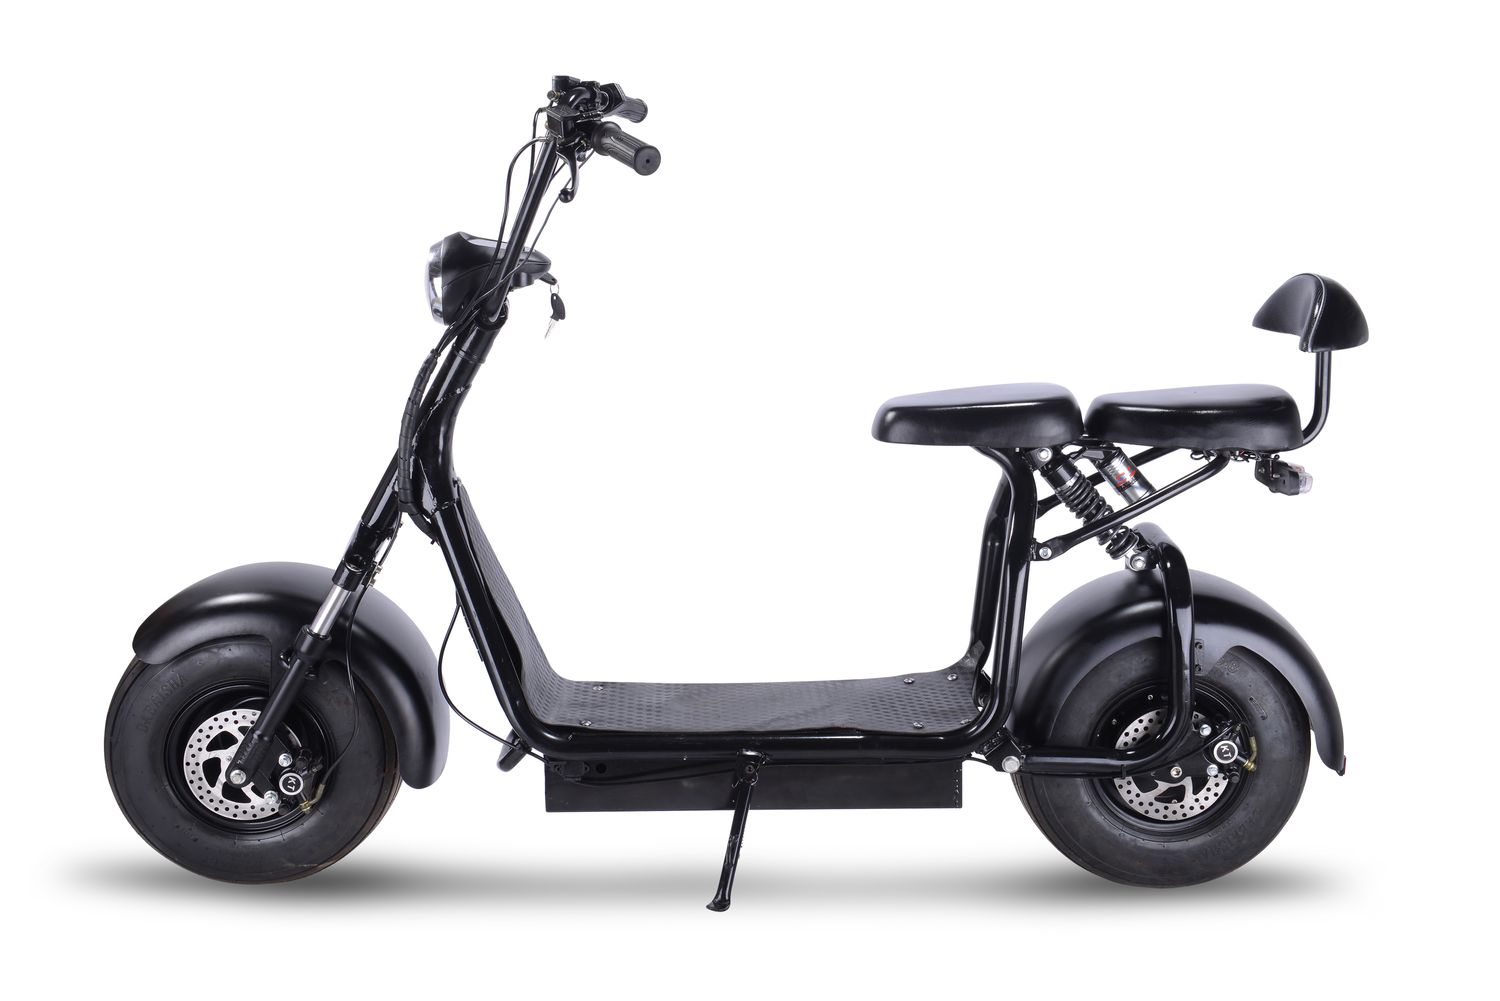 SAY YEAH K1 Black Electric Scooter 1000W 60V Top Speed 25mph Range Per Charge 15-23 miles